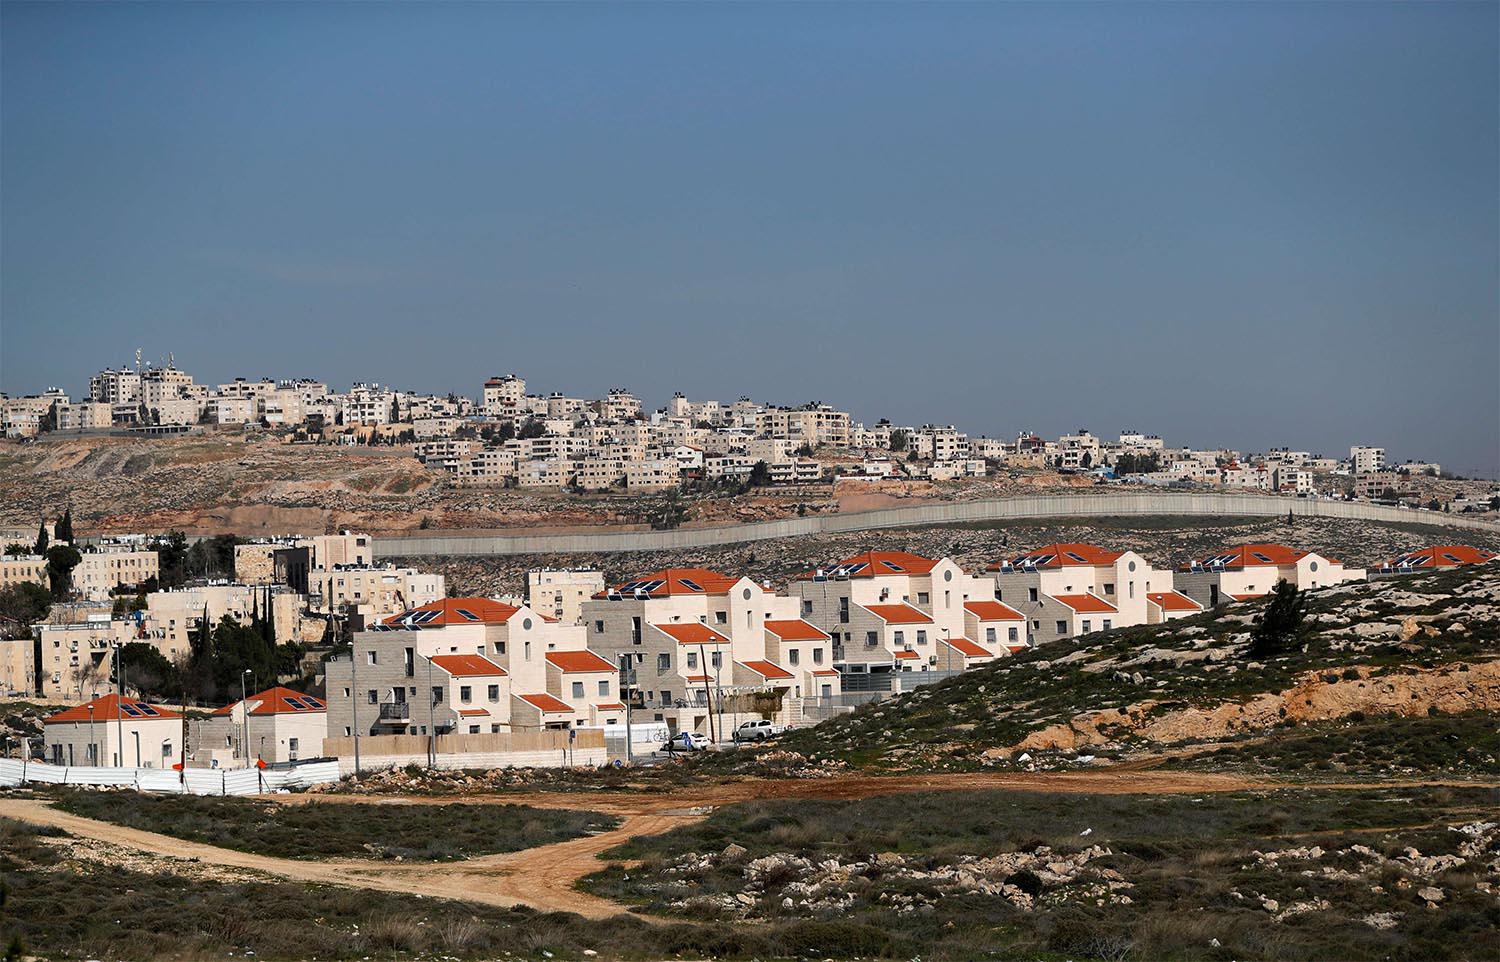 A view shows the Israeli settlement of Pisgat Zeev in the foreground